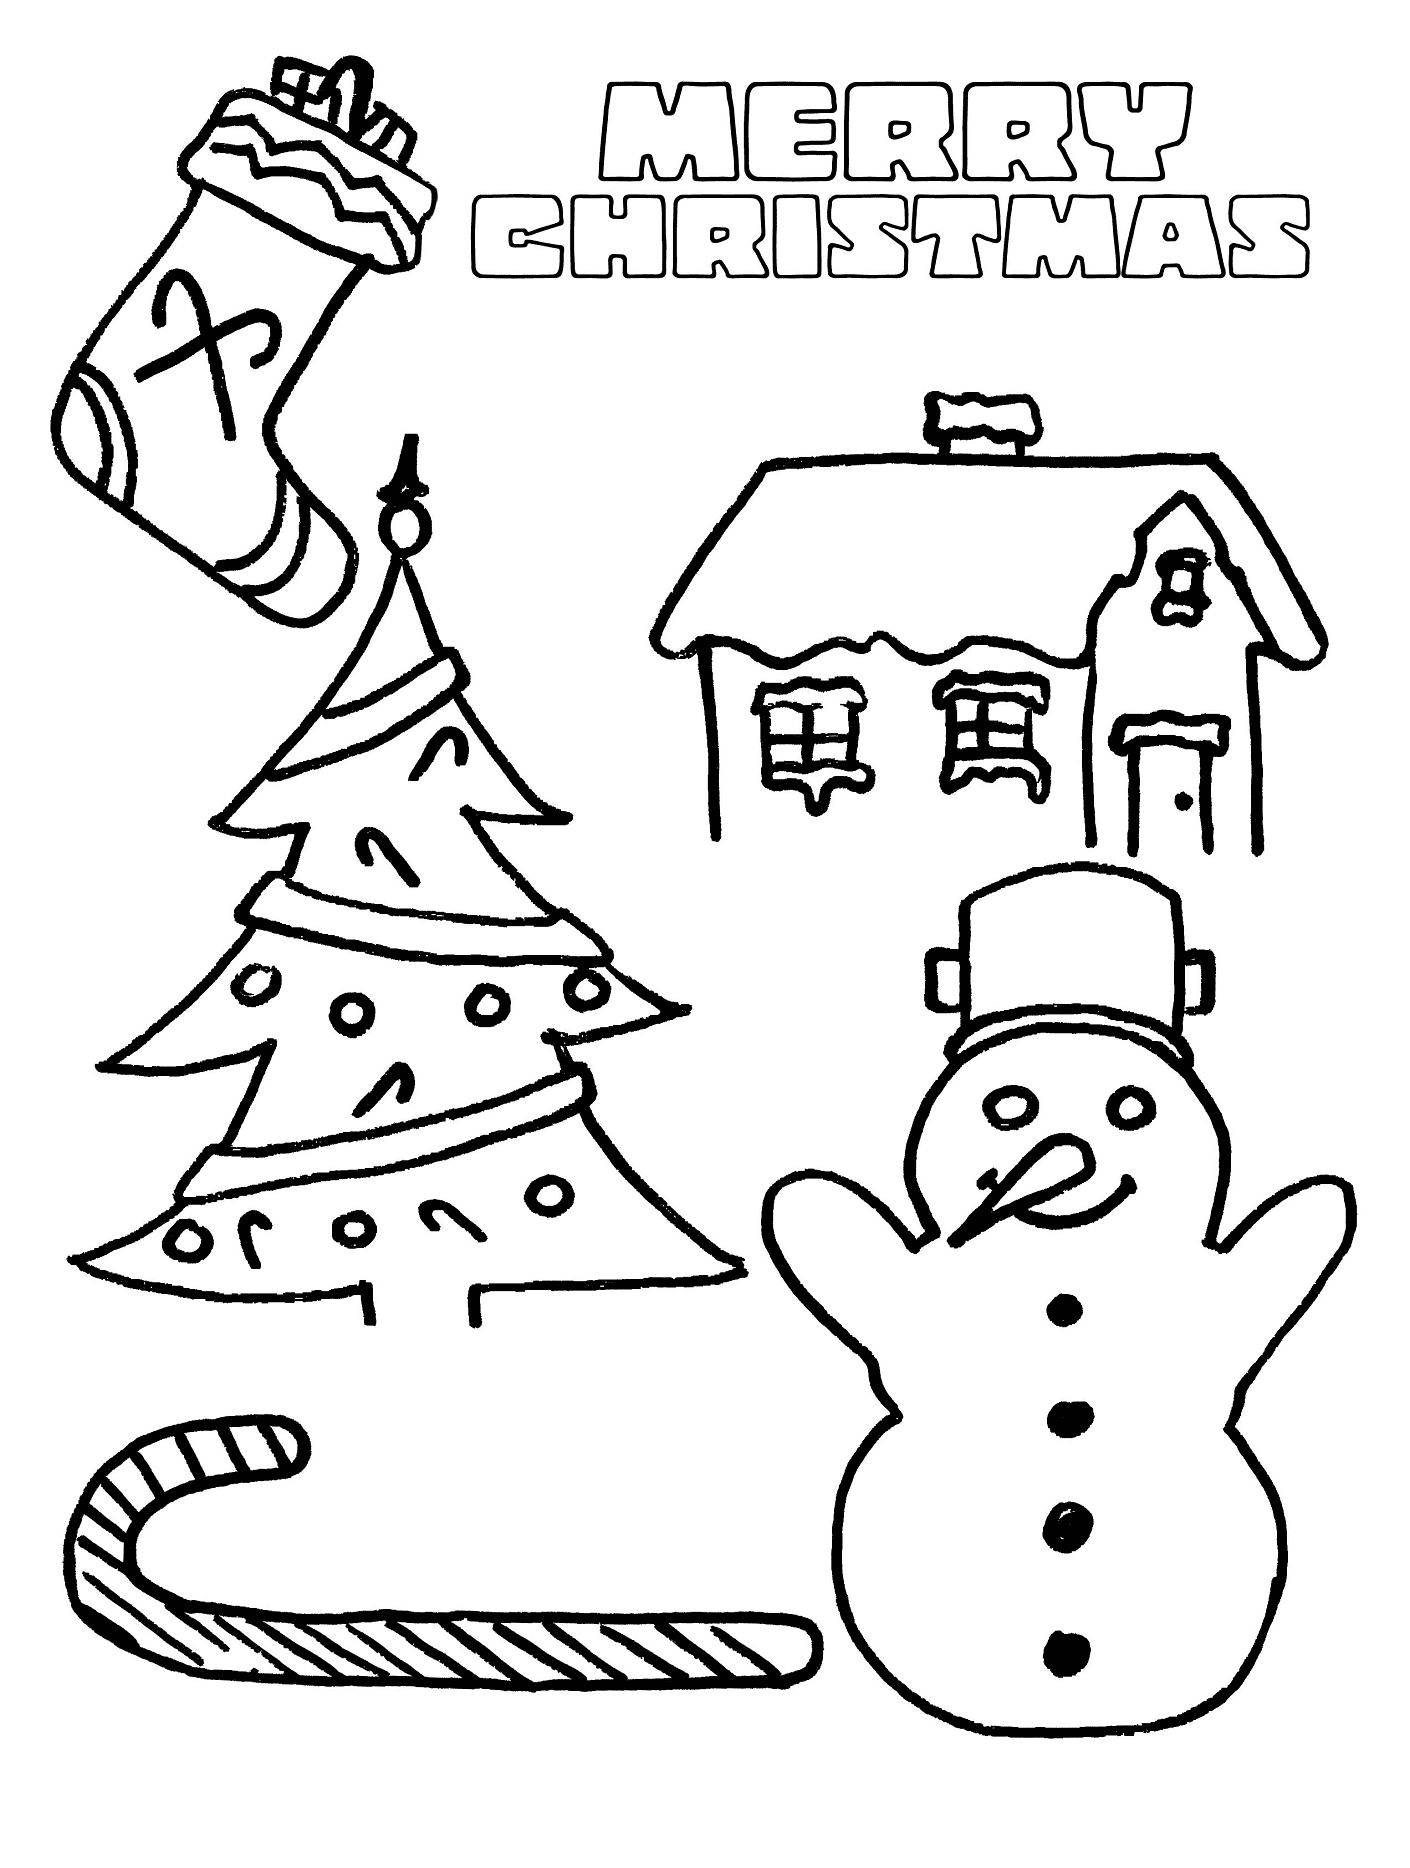 merry-christmas-card-free-coloring-page-free-printable-coloring-pages